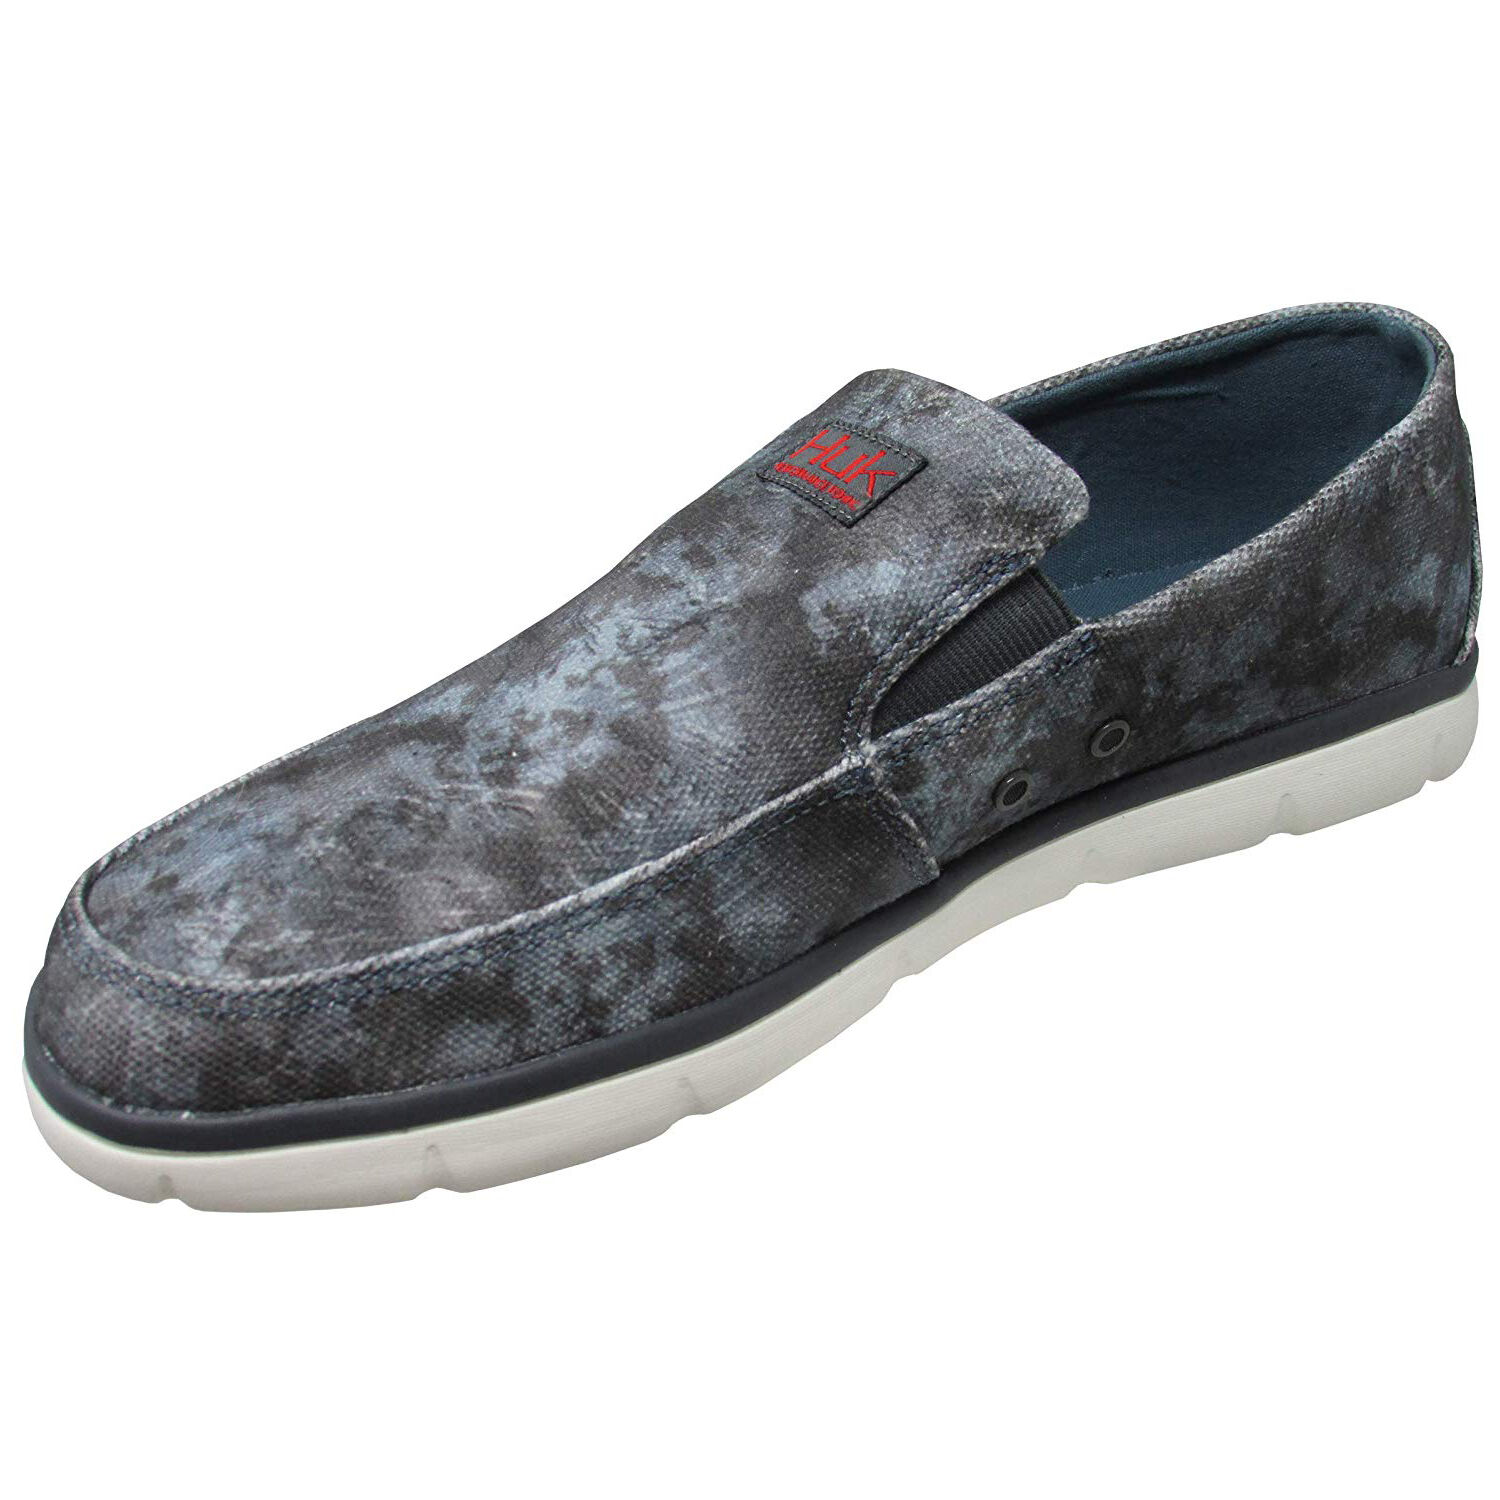 huk brewster casual shoes